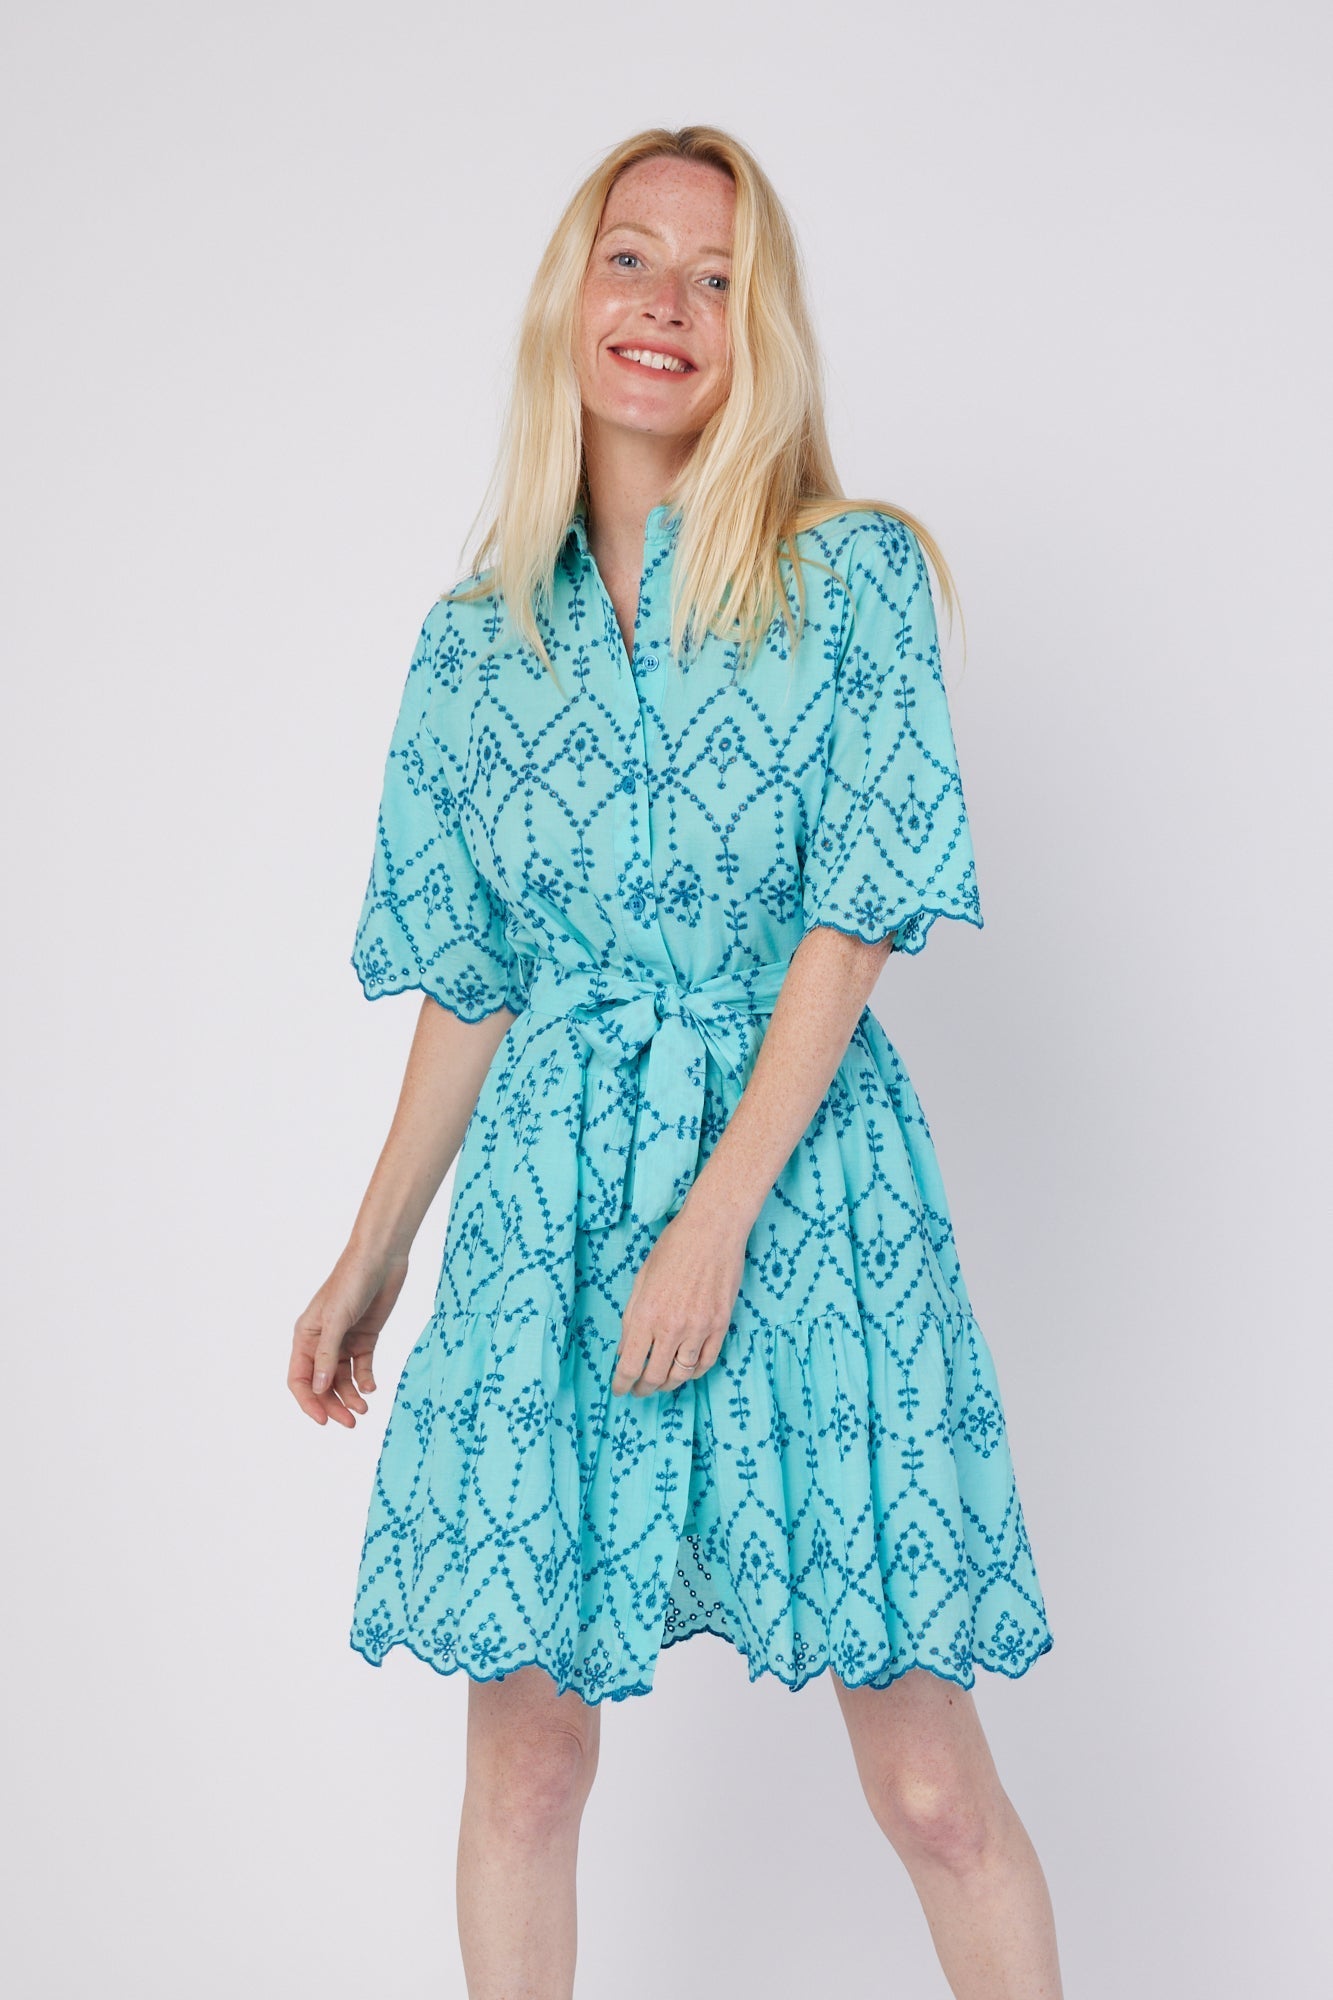 ModaPosa Alcee Short Sleeve Mini Jacquard Shirt Dress with Detachable Belt in Mykonos Eyelet . Discover women's resort dresses and lifestyle clothing inspired by the Mediterranean. Free worldwide shipping available!